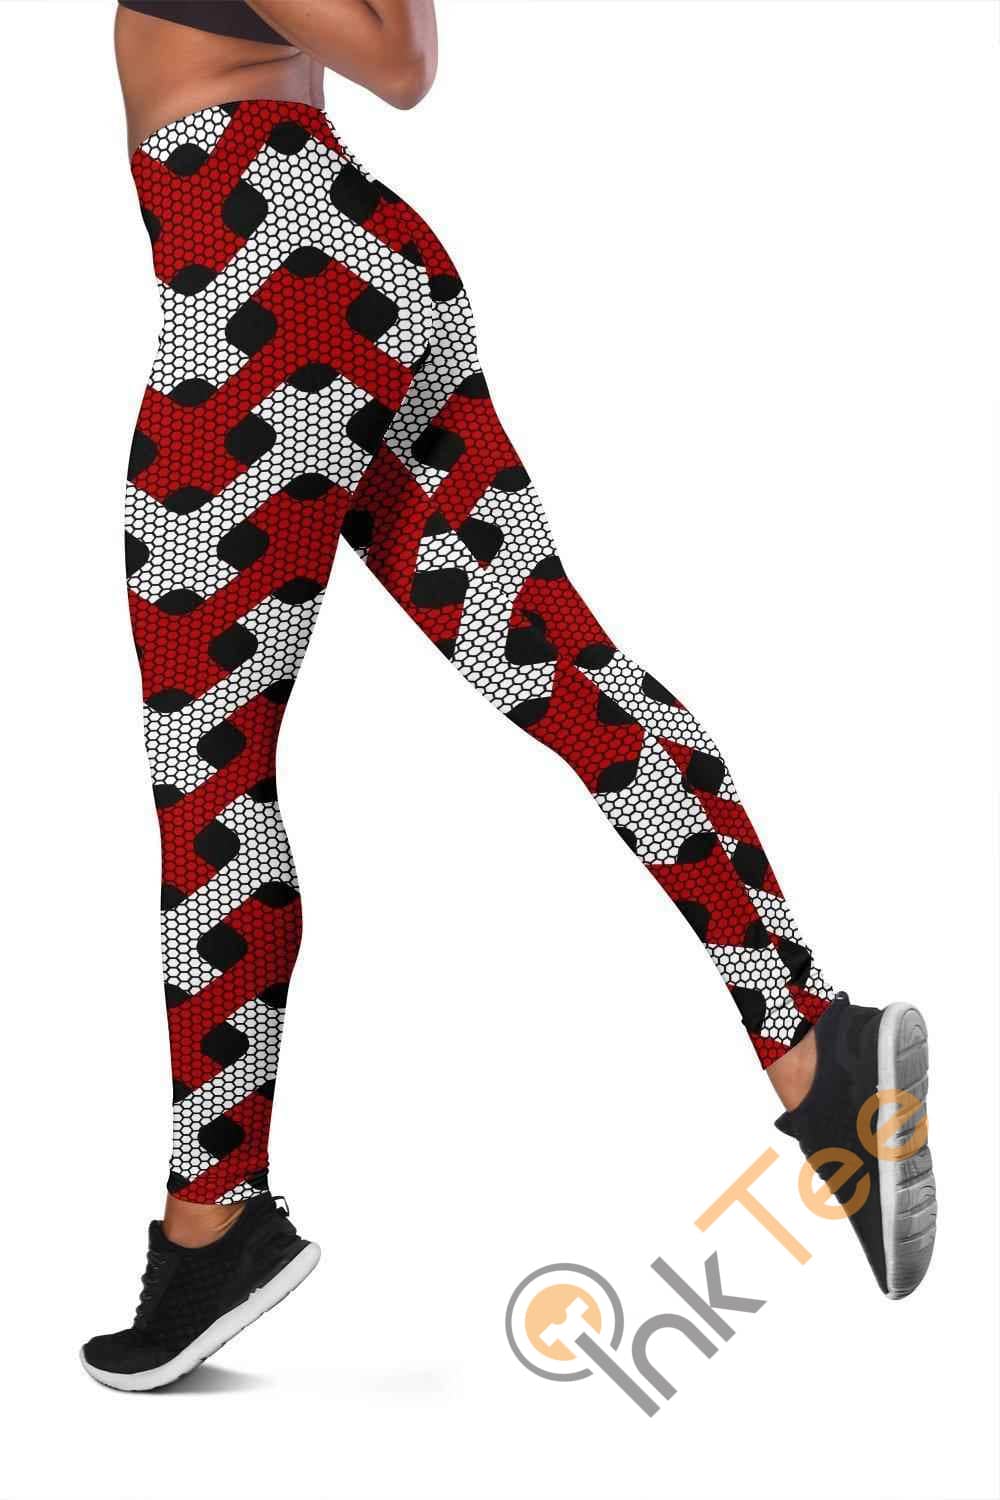 Inktee Store - North Carolina State Wolfpack Inspired Liberty Green 3D All Over Print For Yoga Fitness Fashion Women'S Leggings Image